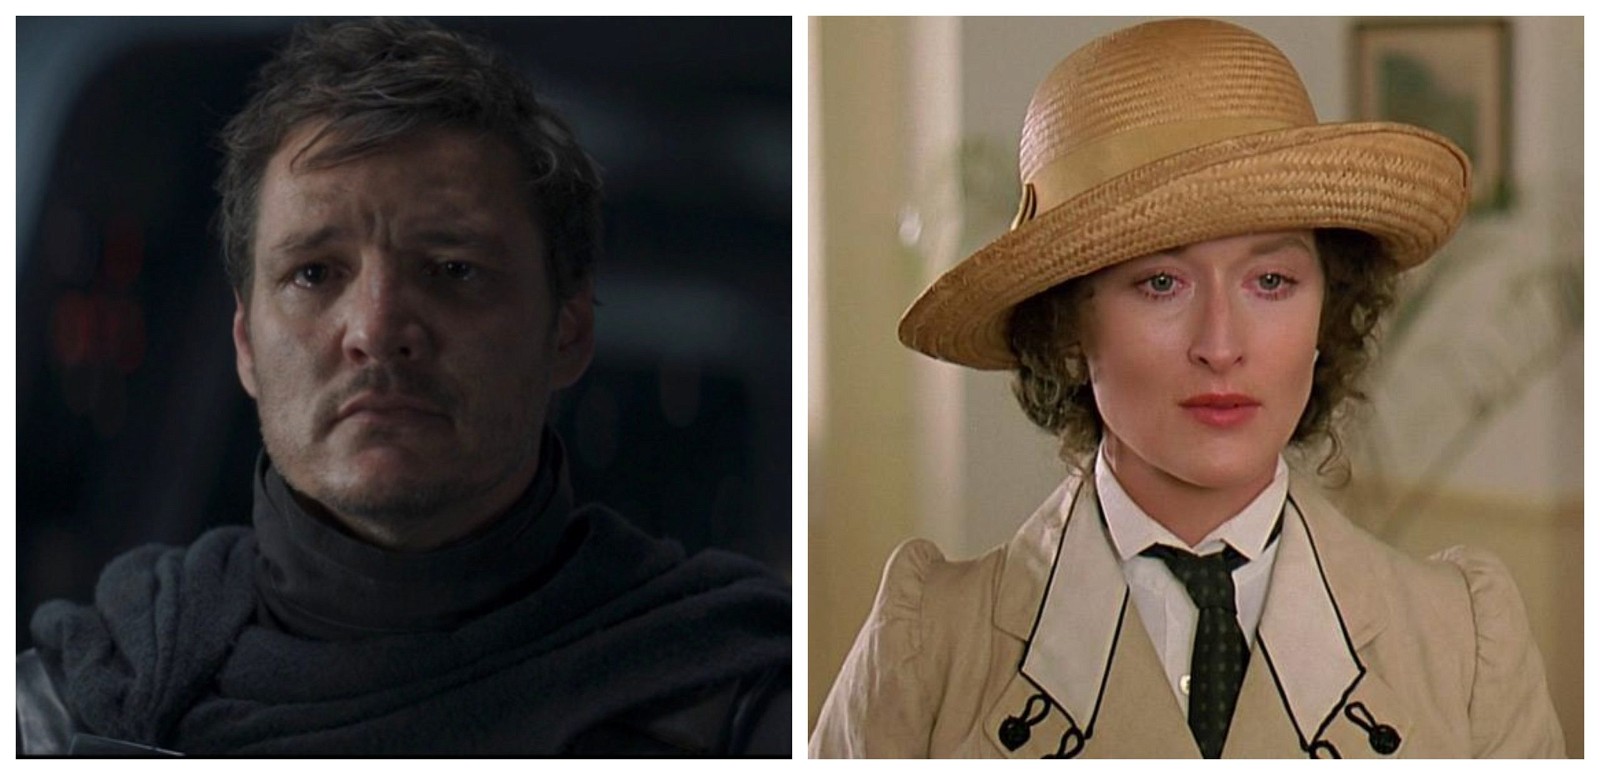 Pedro Pascal in The Mandalorian and Meryl Streep in Out of Africa